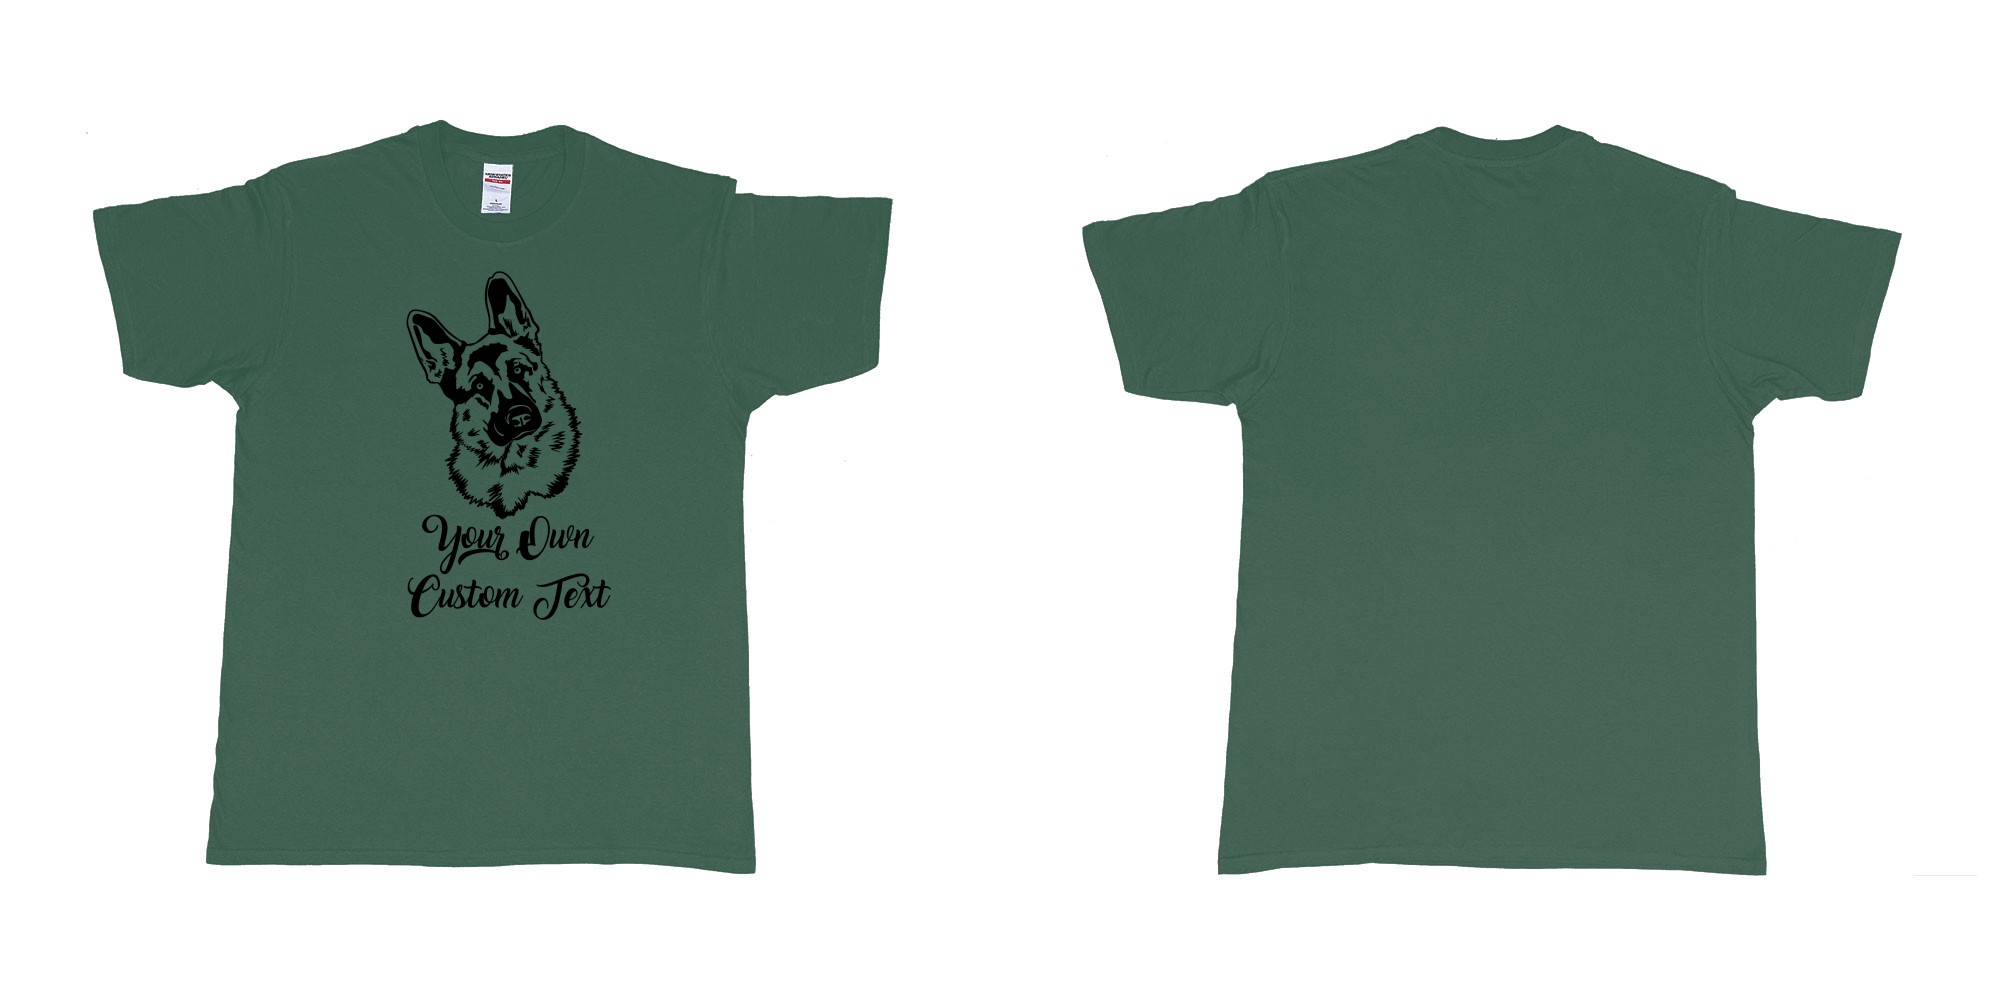 Custom tshirt design zack german shepherd tilts its head your own custom text in fabric color forest-green choice your own text made in Bali by The Pirate Way